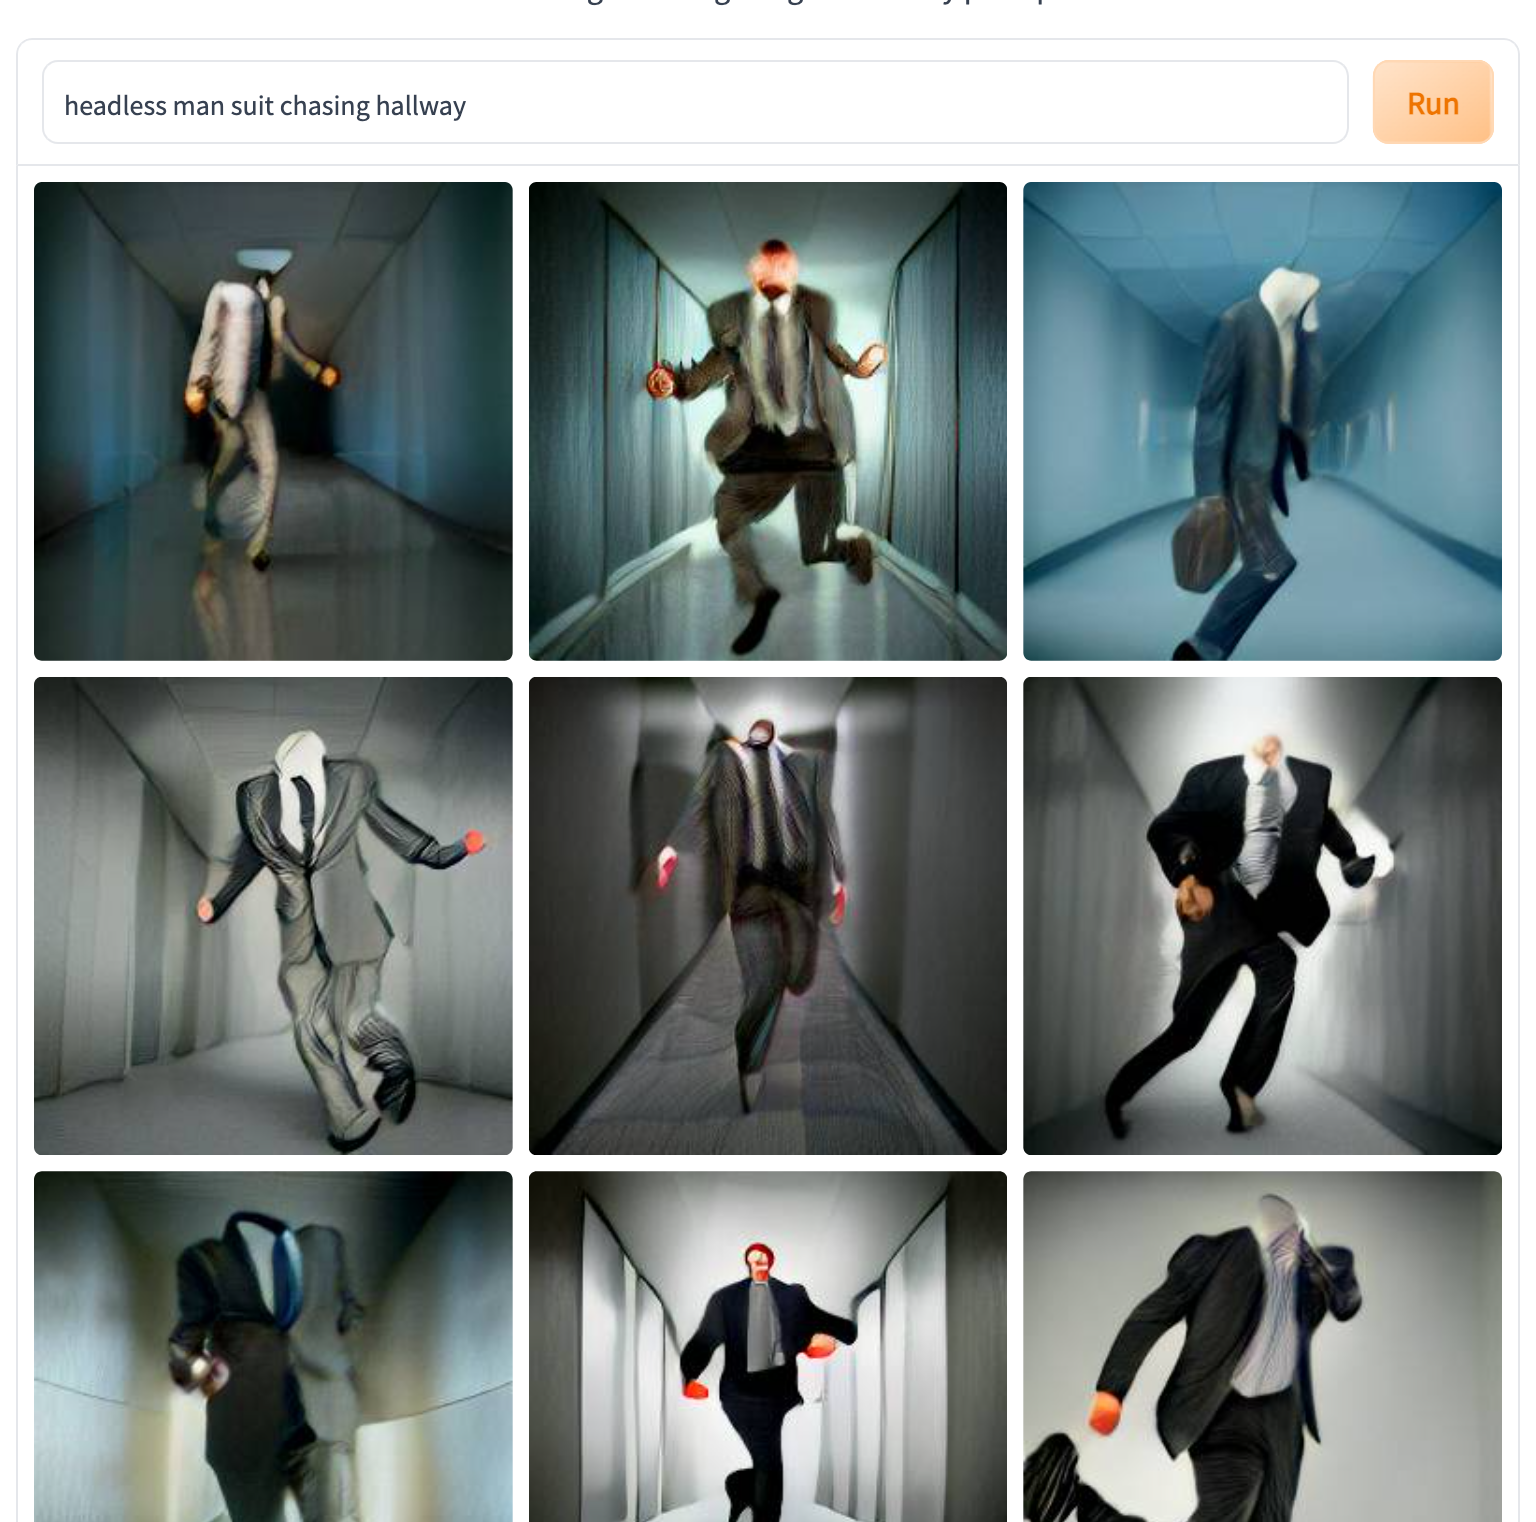 Nine AI images of a headless man in a suit running down a hall